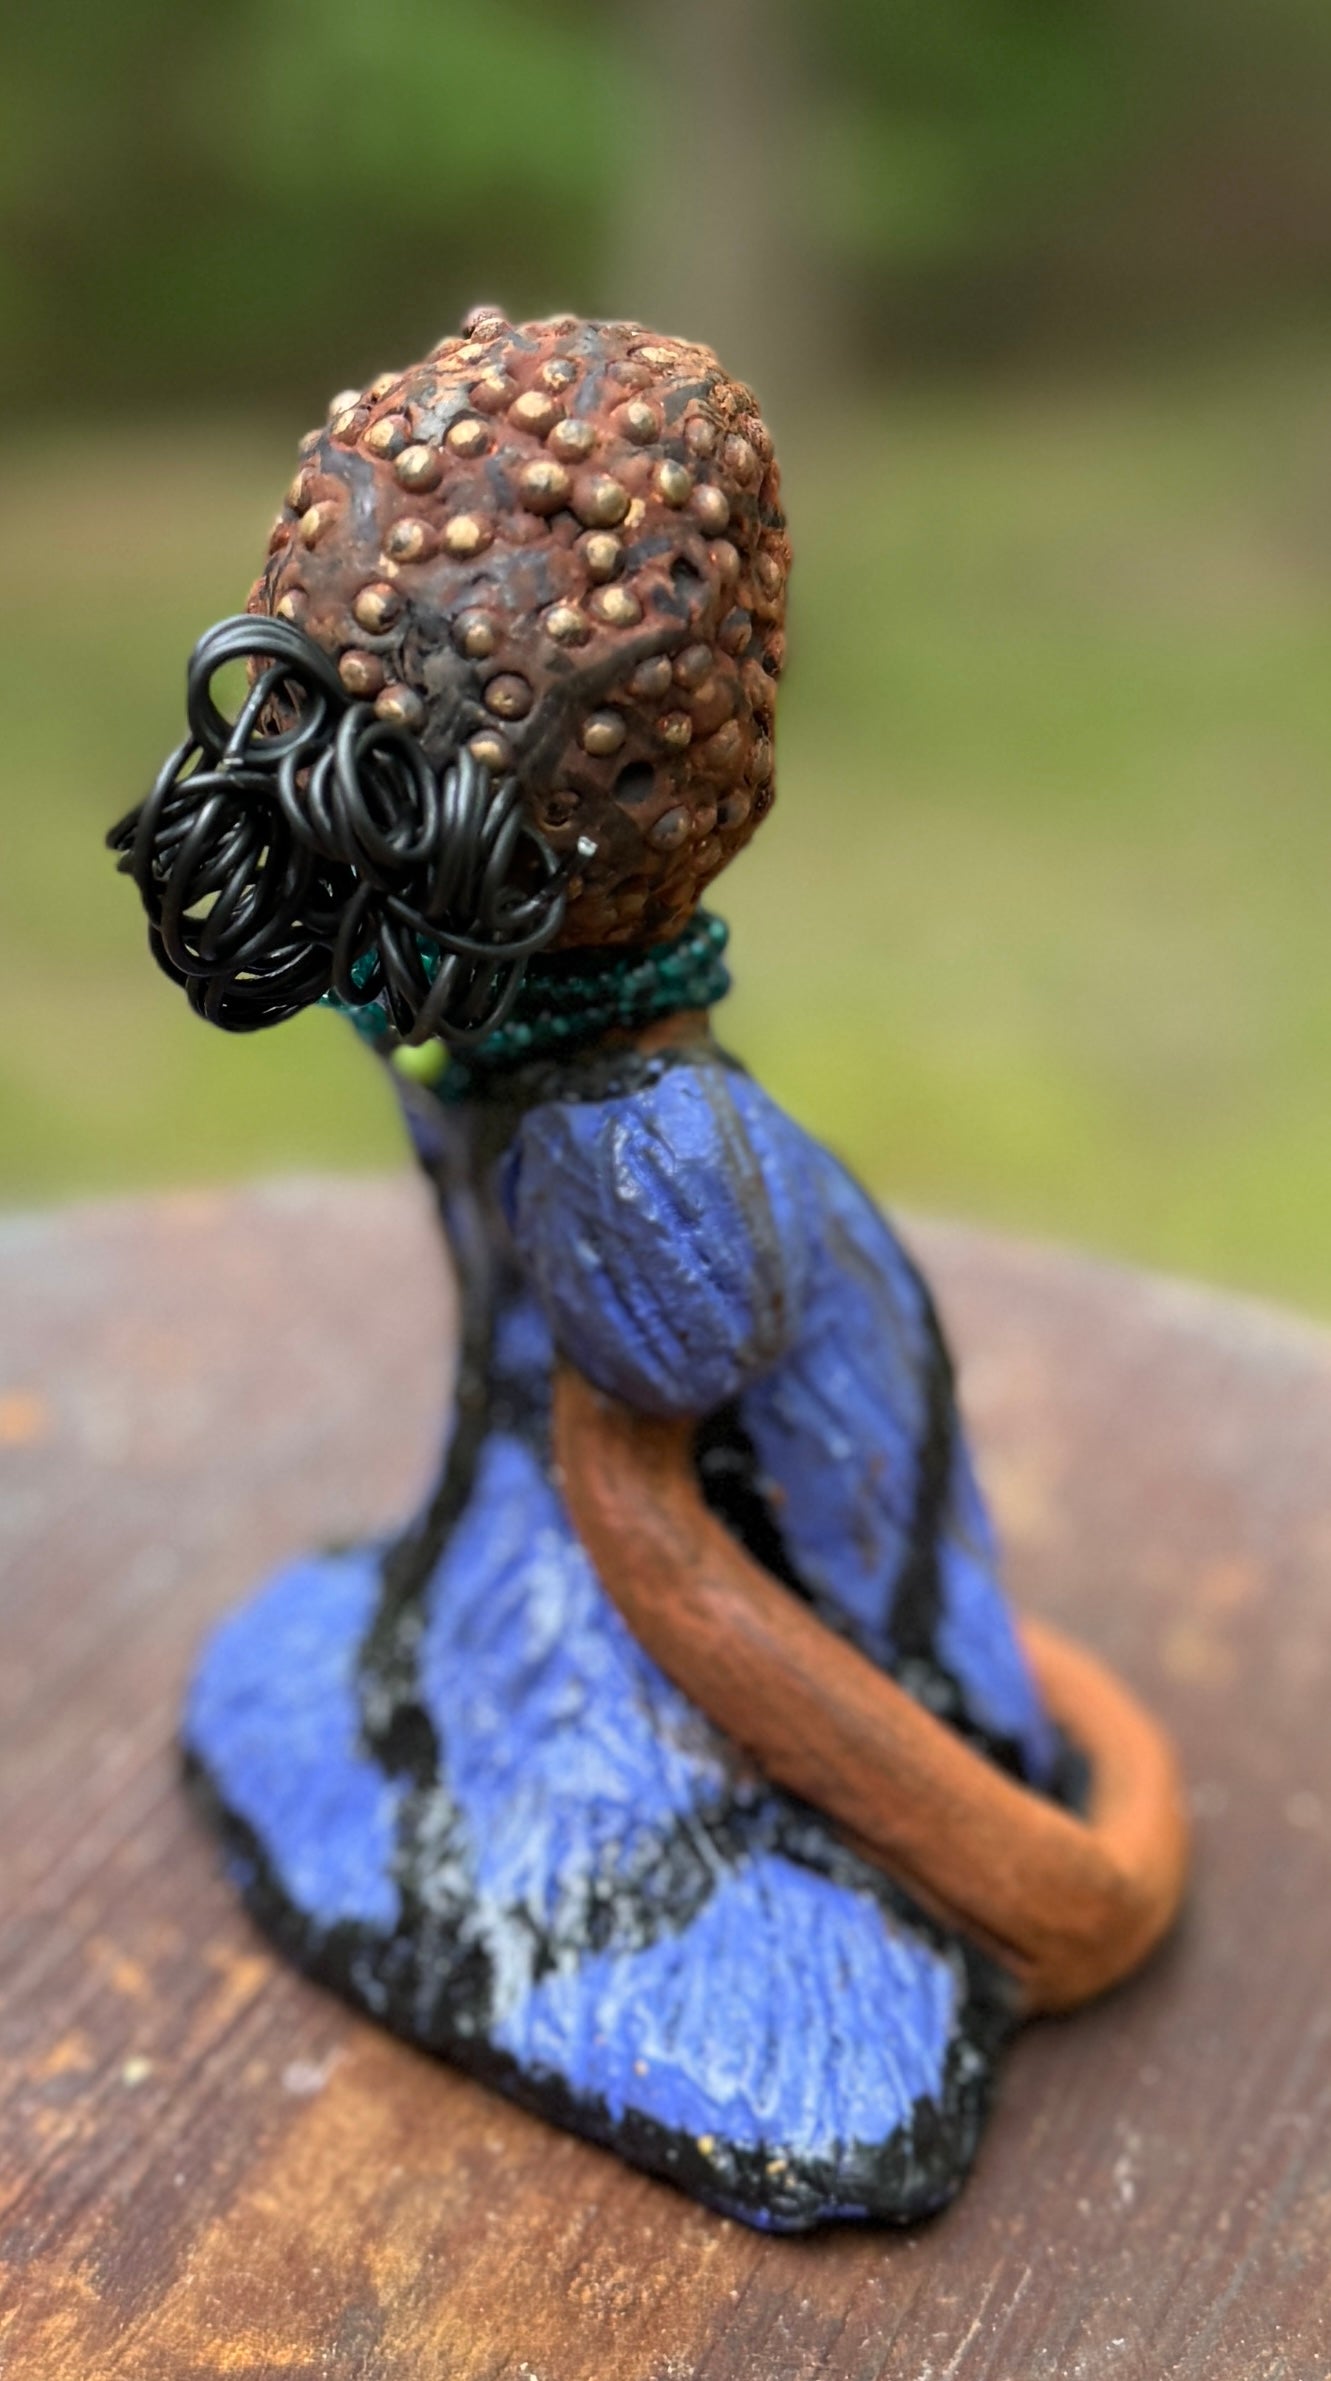 Angela is 7" x 5" x 3" raku fired sculpture and weighs 1.2 lbs.<br>She wears a lustrous African striped purple blue dress.<br>Her coiled and beaded wire hair is her crown of glory.<br><br>Angela sits in a yoga pose. Her expression is &nbsp;of curiosity. She will make an ideal beginning piece from the Herdew Collection!<br>Free Shipping